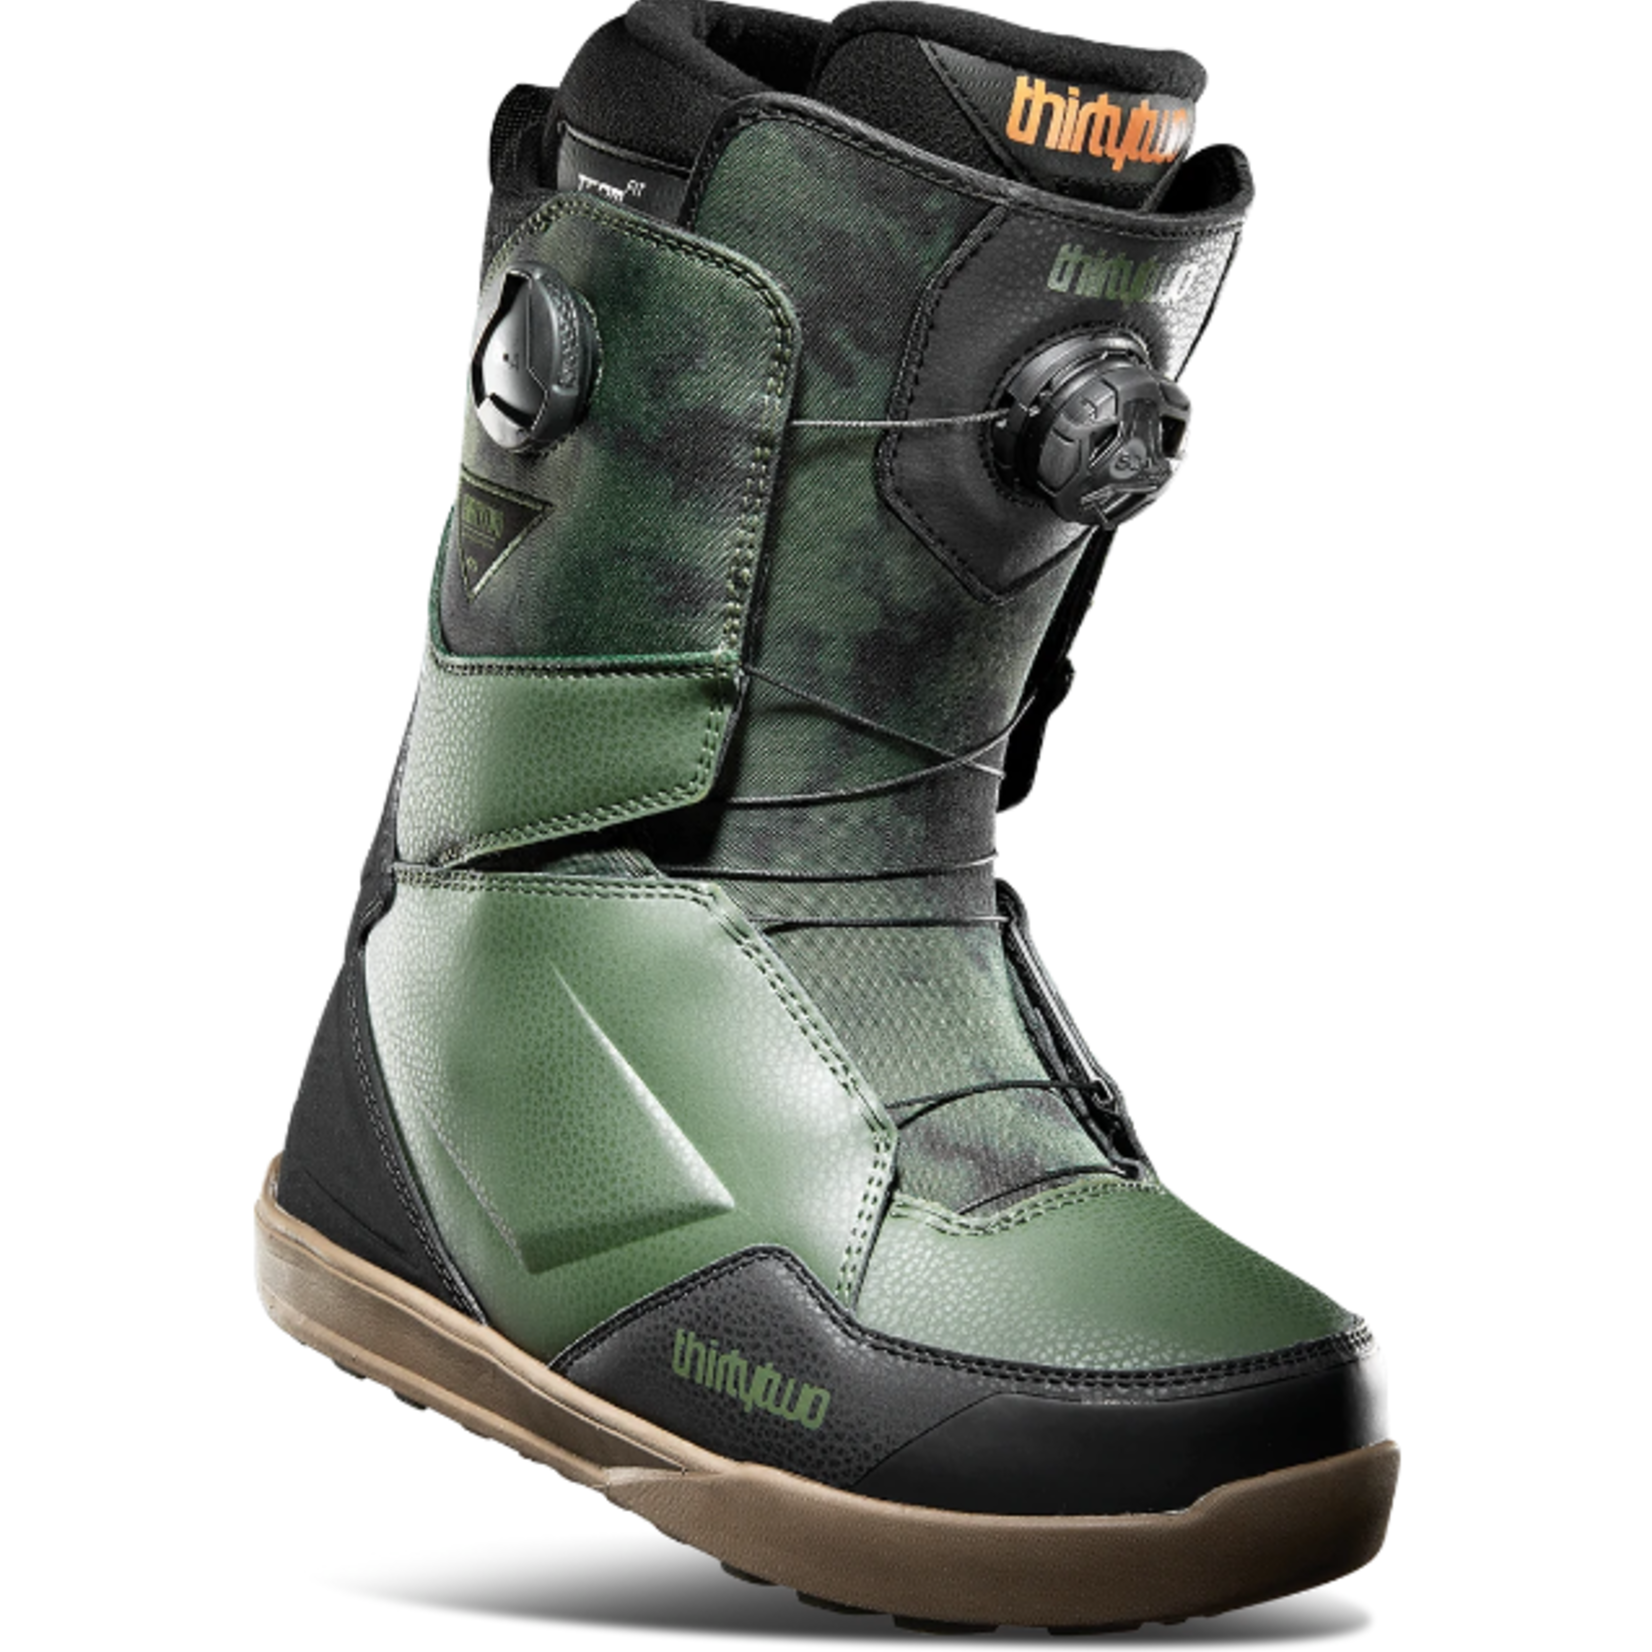 THIRTY TWO MEN'S THIRTYTWO LASHED DOUBLE BOA SNOWBOARD BOOTS - SALE